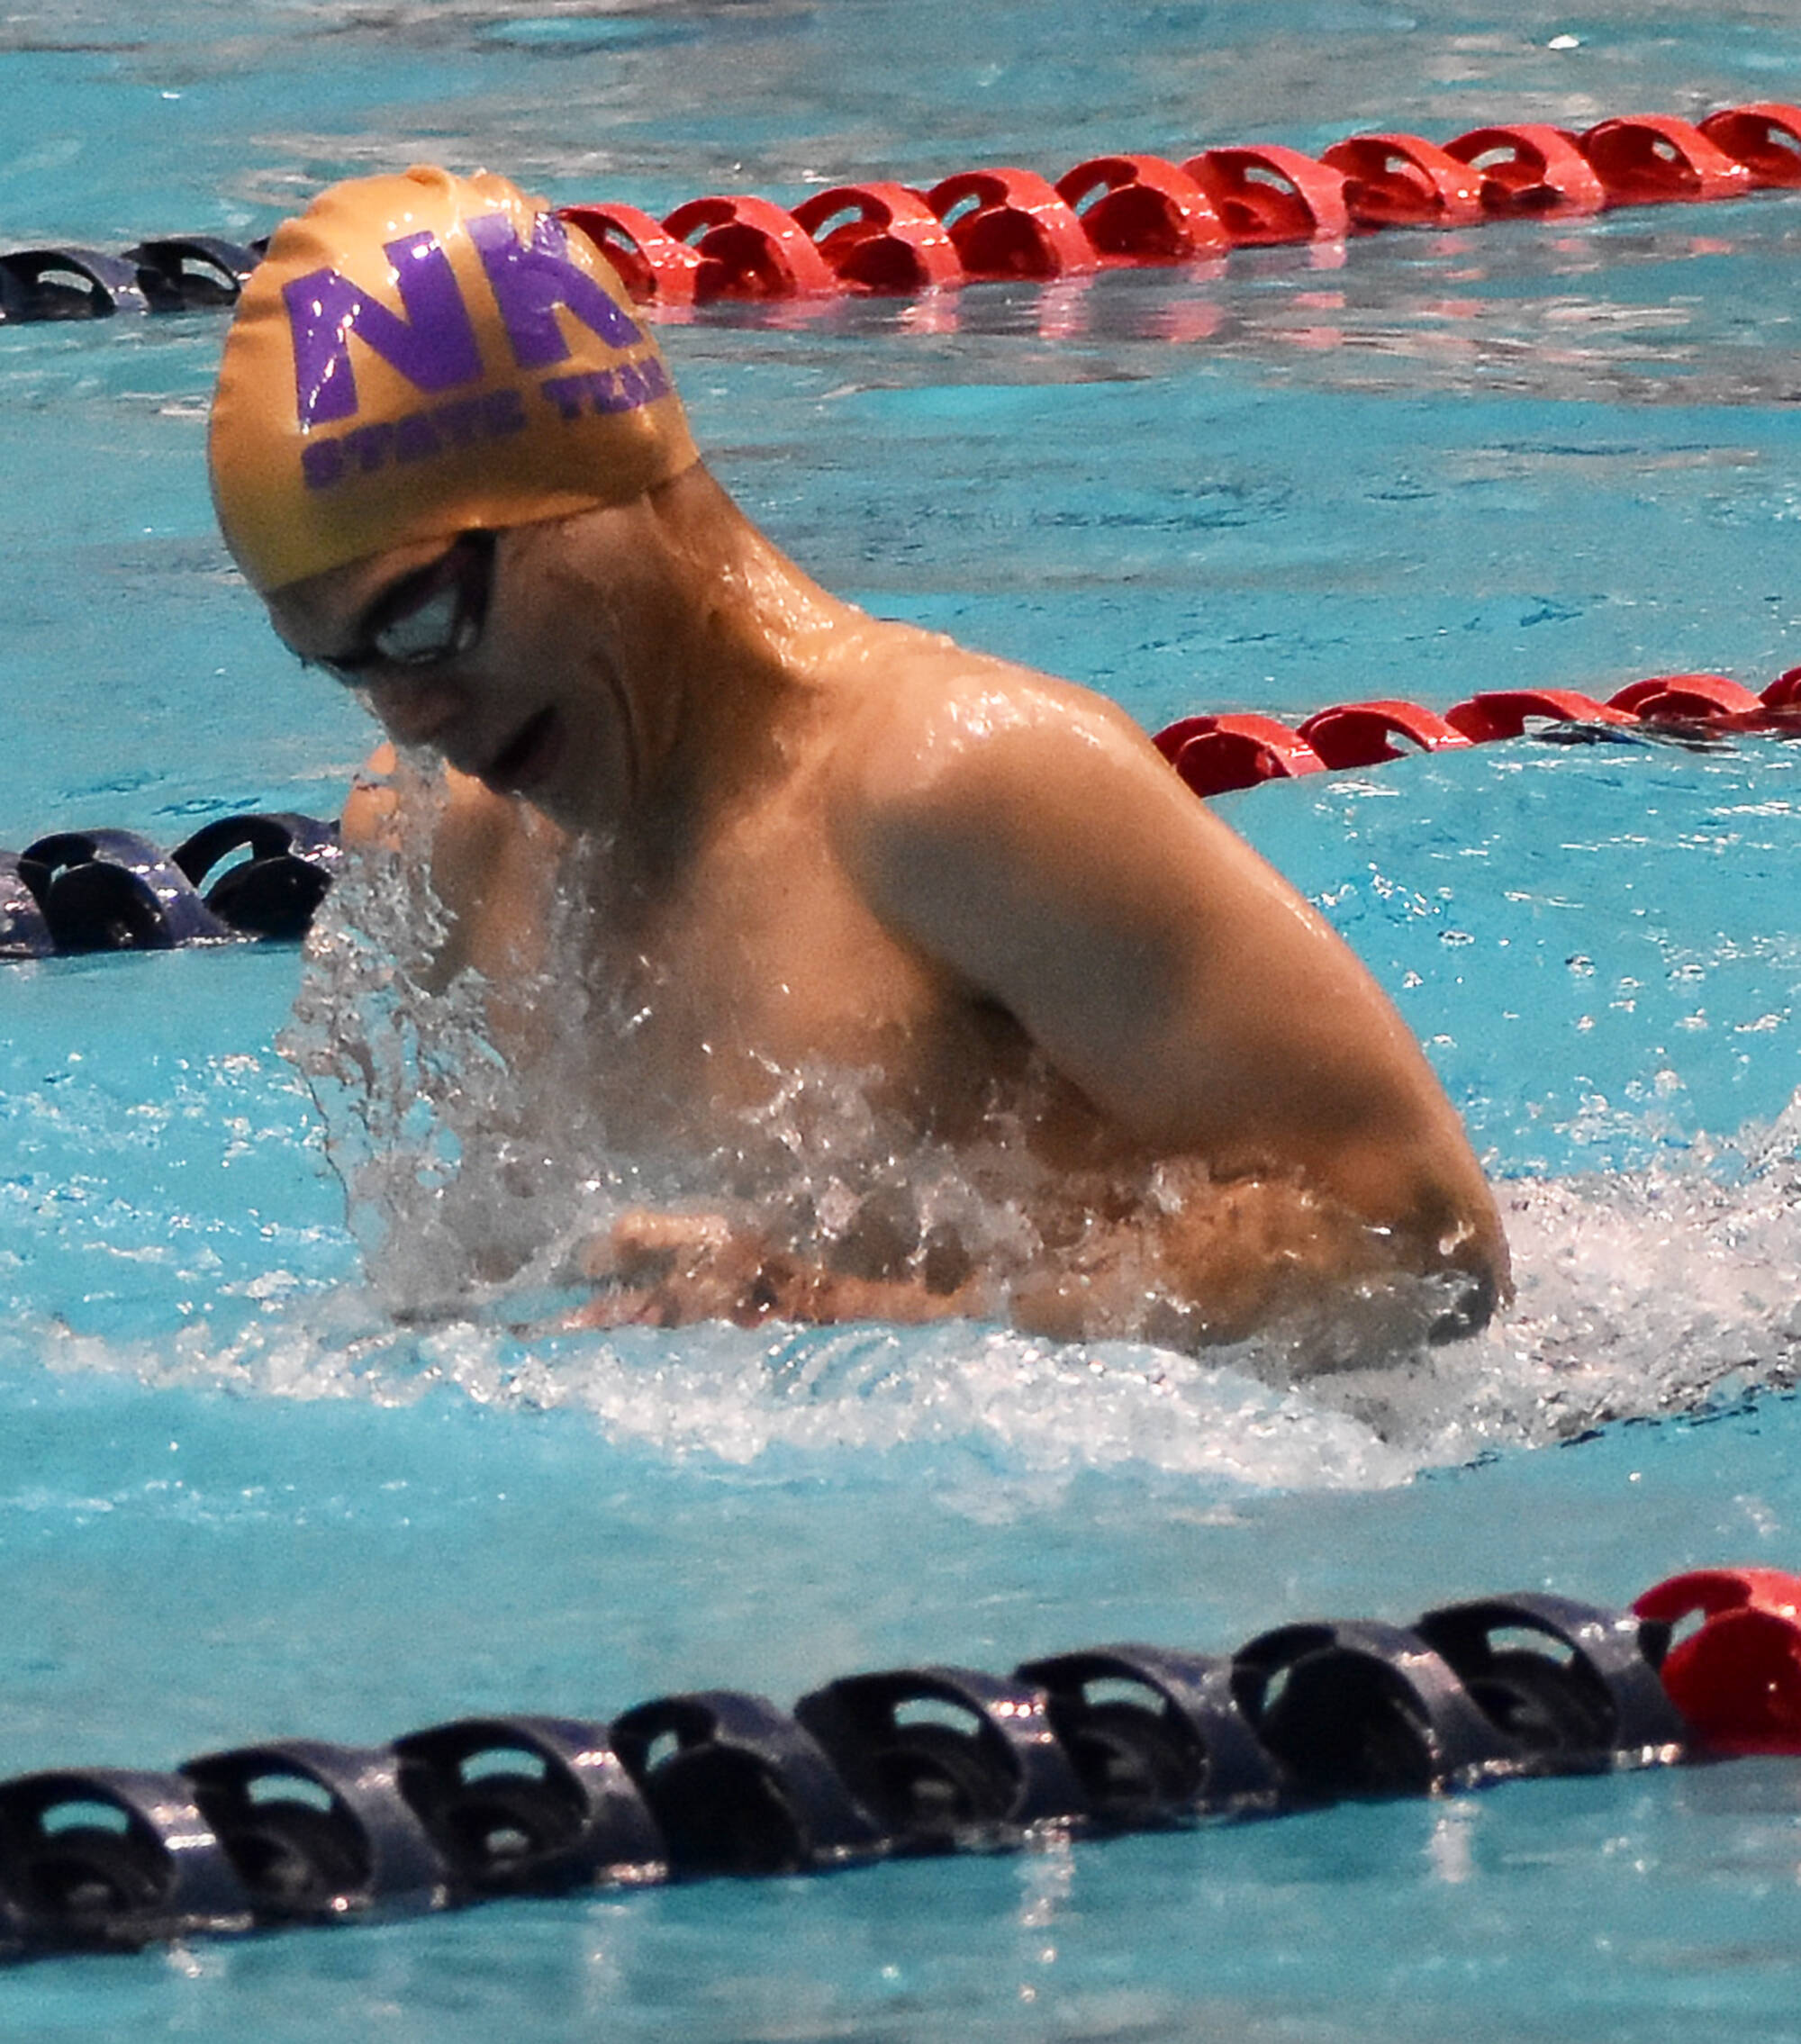 North Kitsap’s Max Nolan looks to place in the breaststroke event.